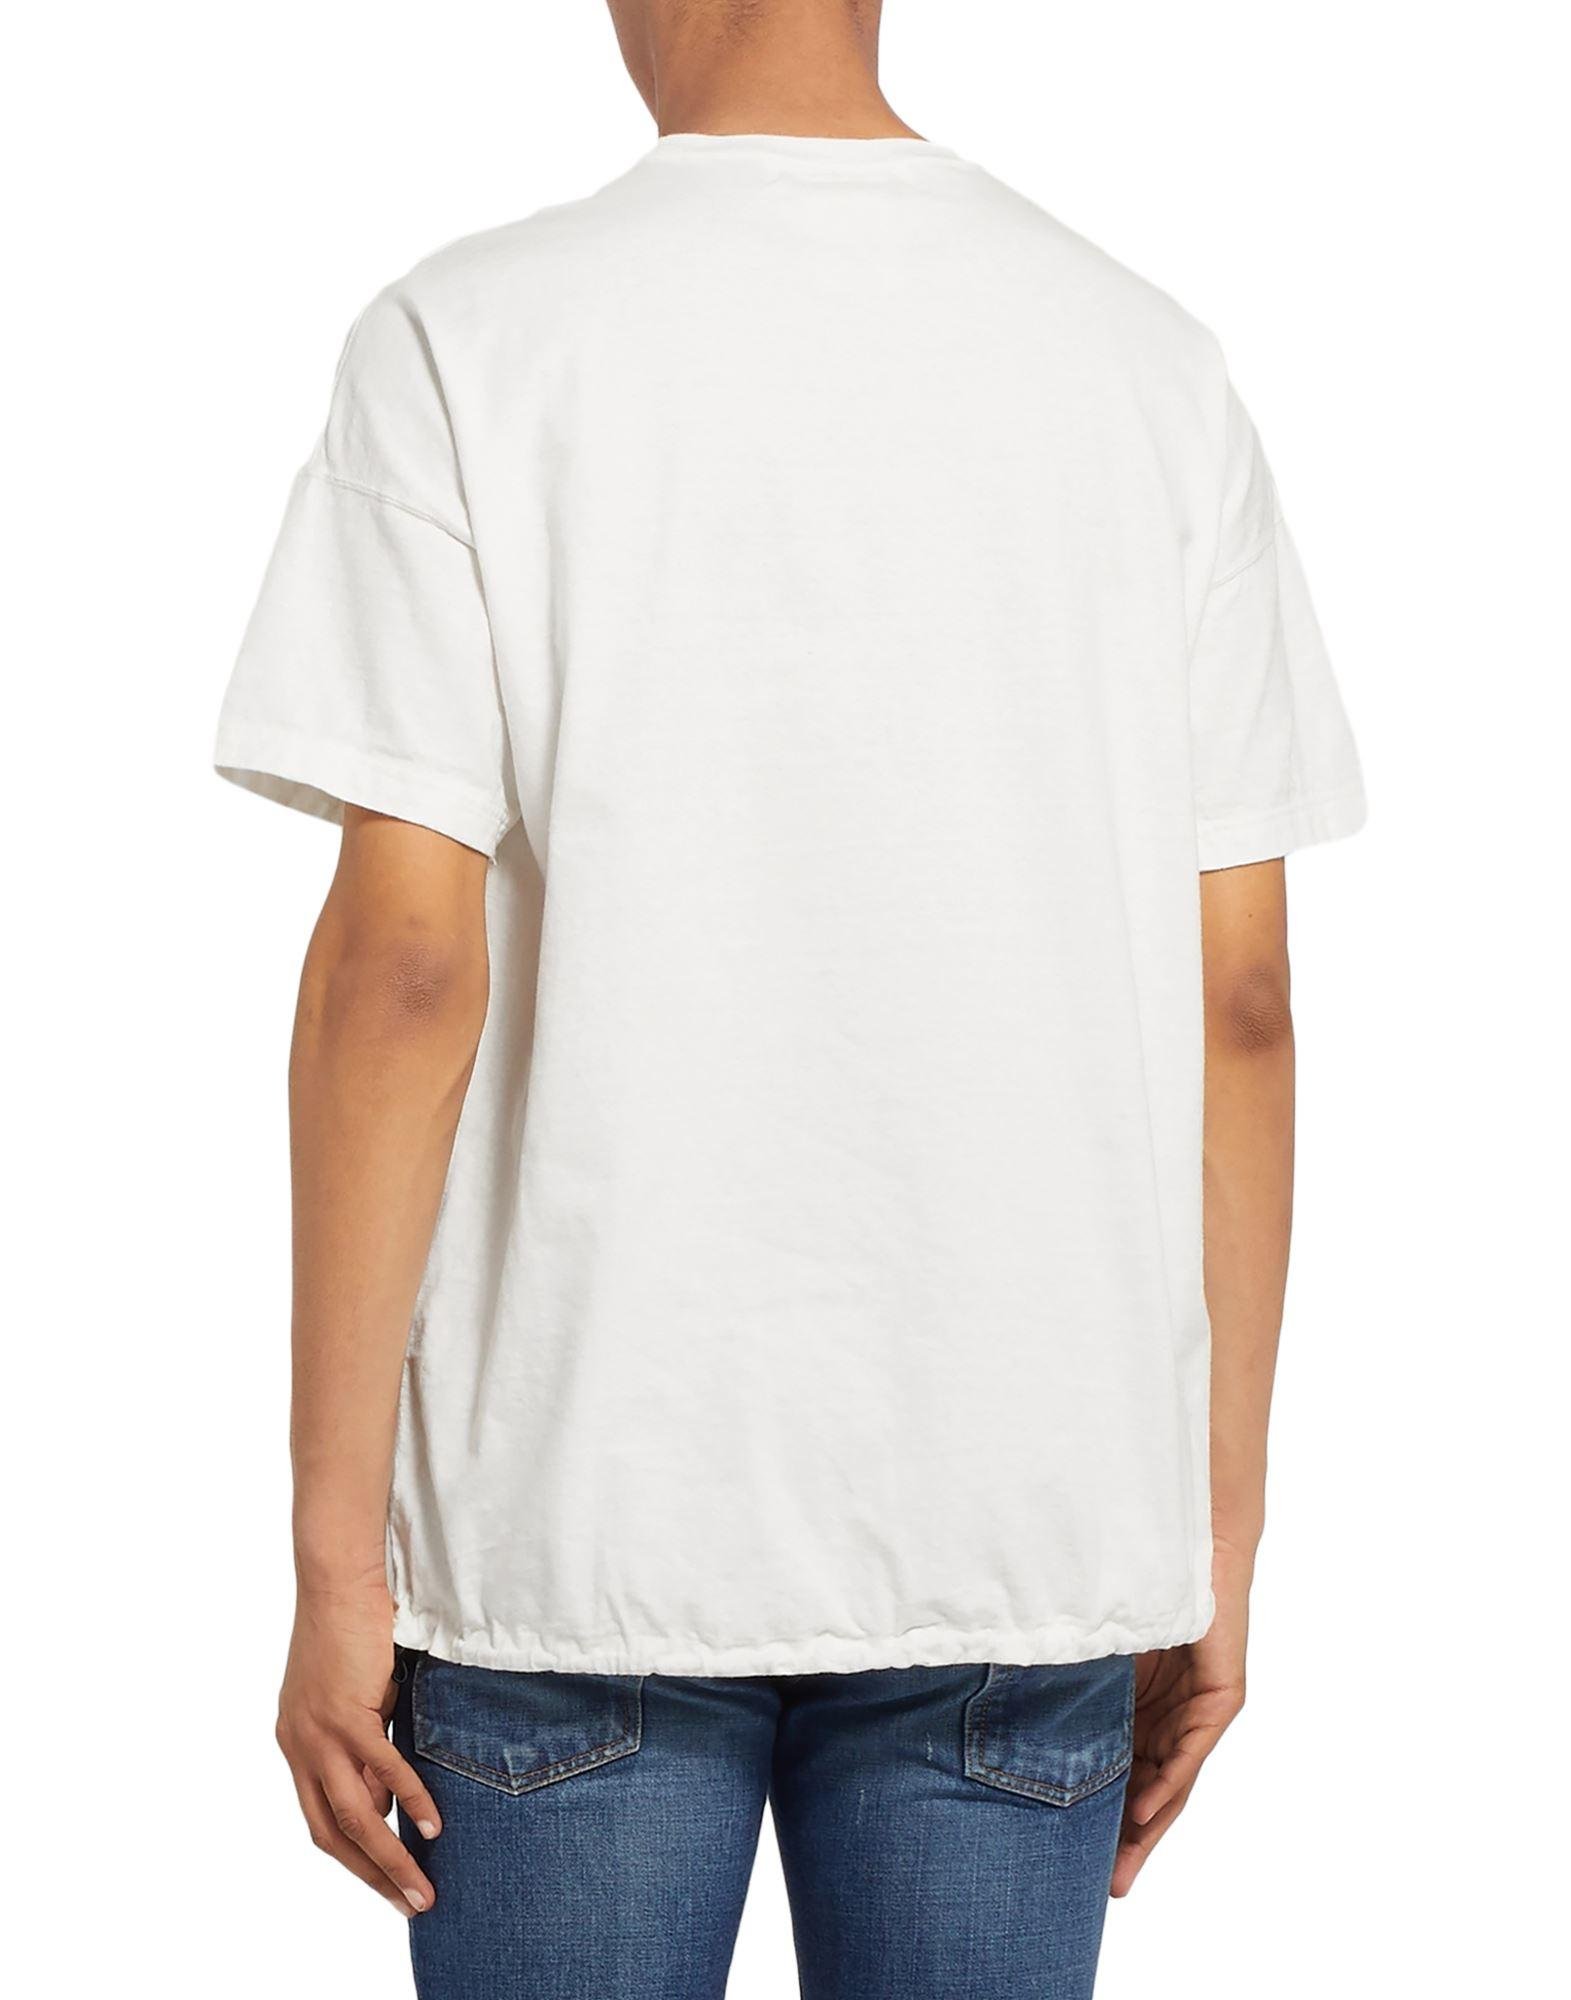 Remi Relief Cotton T-shirt in White for Men - Lyst